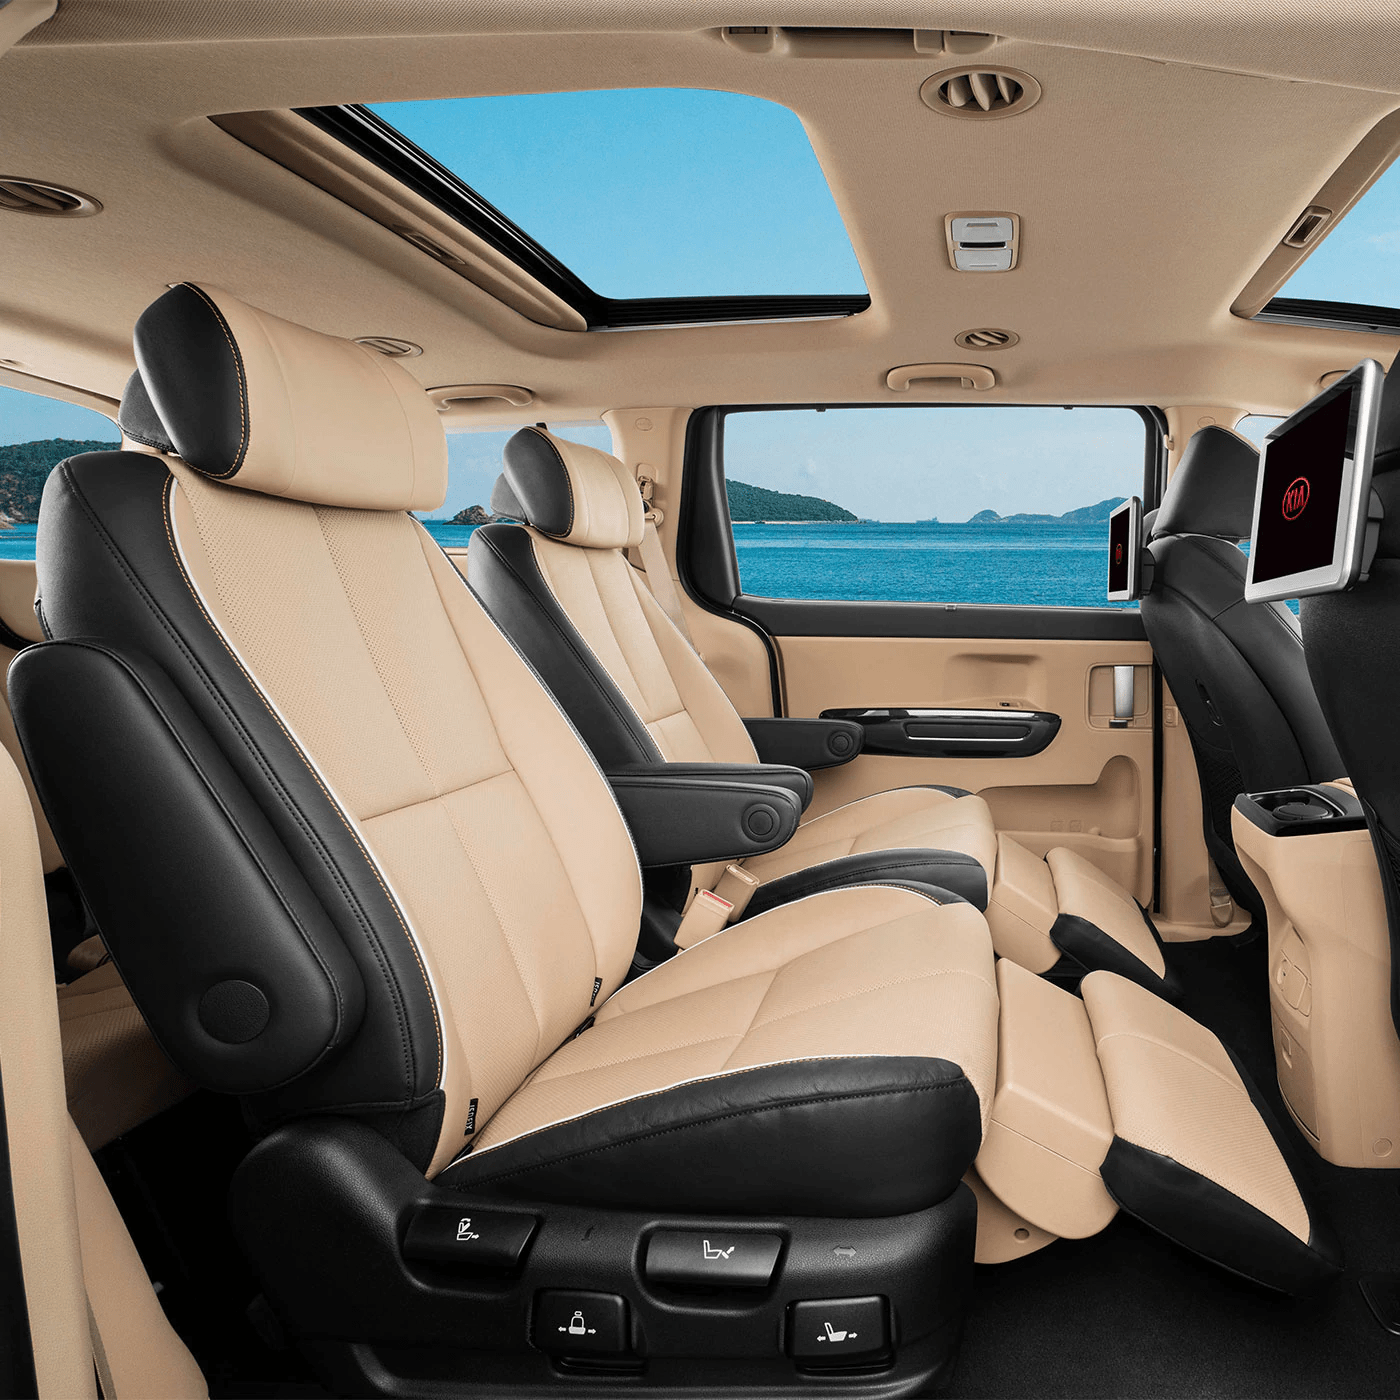 Just like the VIP Seats with Leg Support that makes it feel like a lounge, Kia Carnival comes replete with features that are bound to indulge.